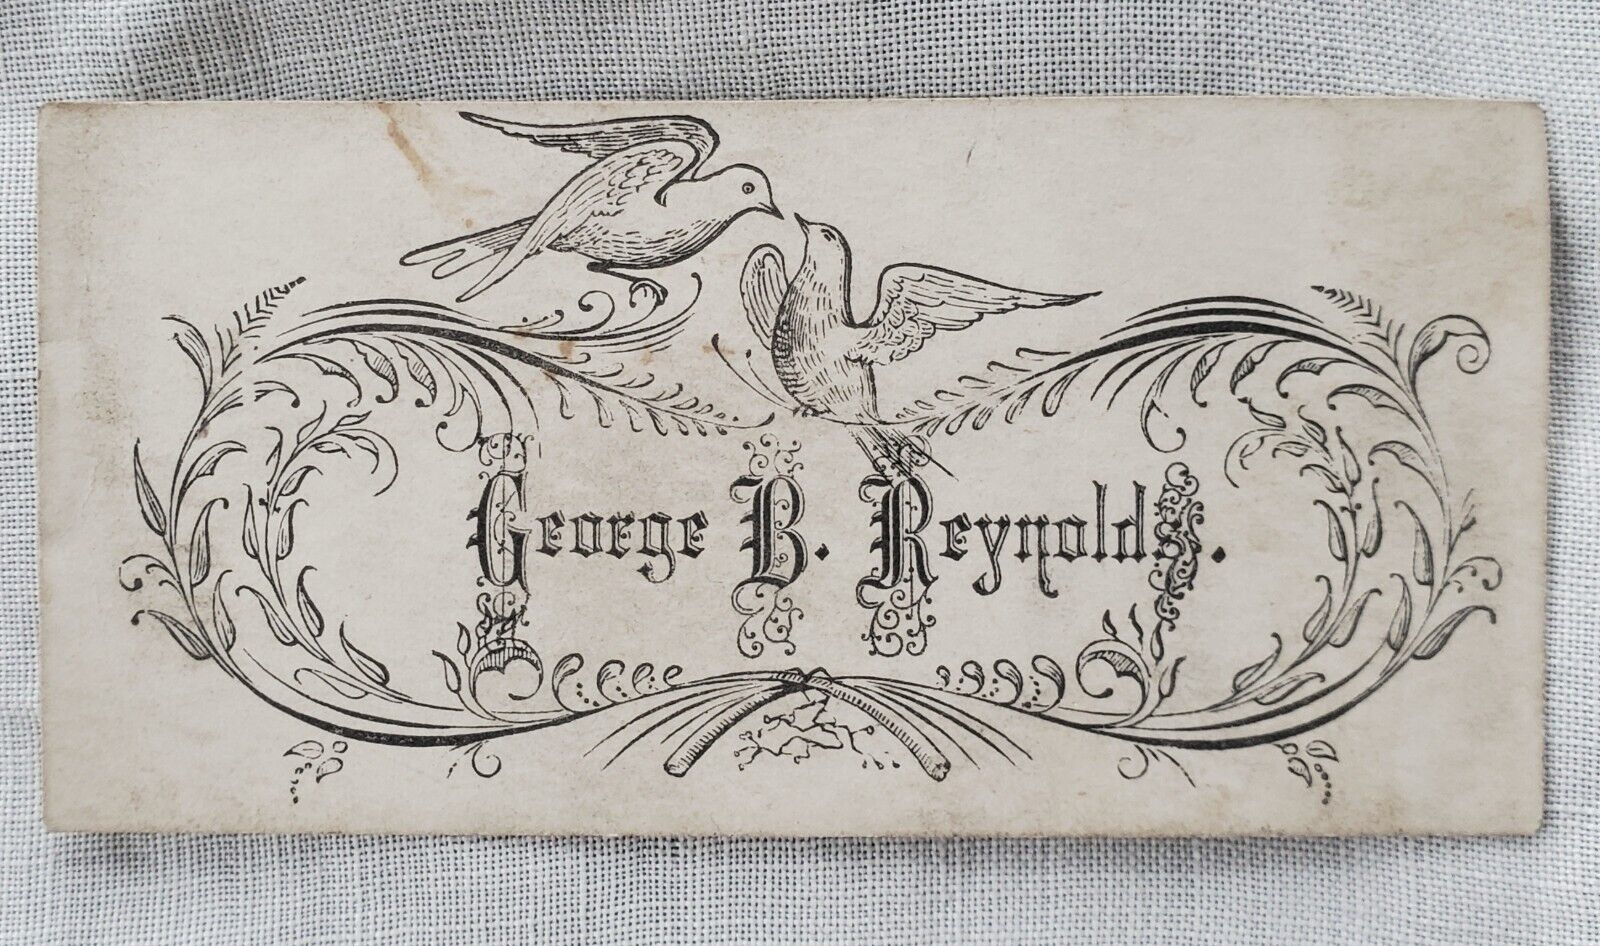 Antique Ornate Victorian Calling Card w/ Doves - George B. Reynolds